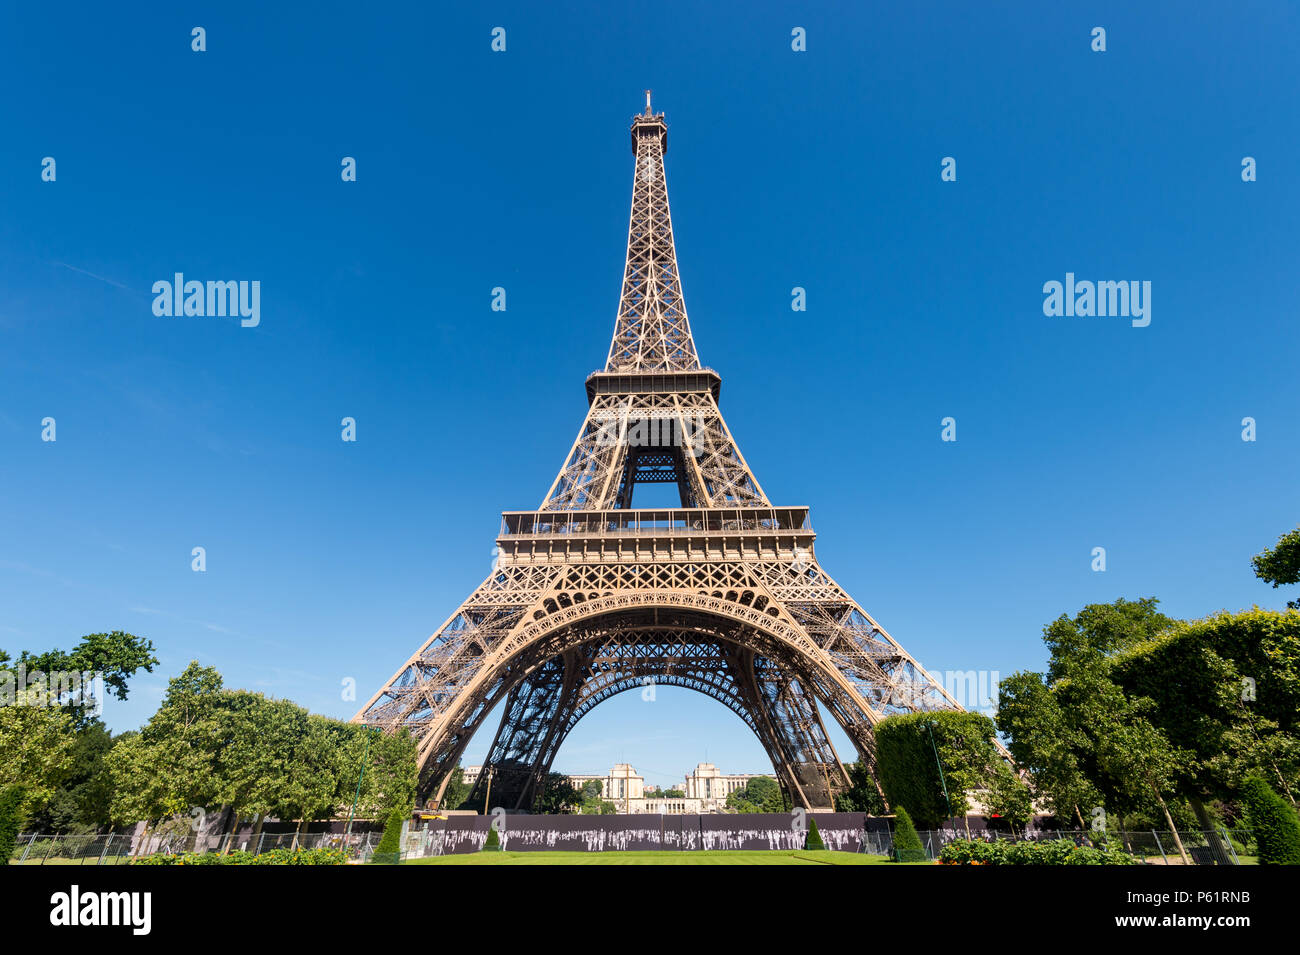 Paris, France - 23 June 2018: Eiffel Tower from the Champ de Mars gardens in summer. Stock Photo